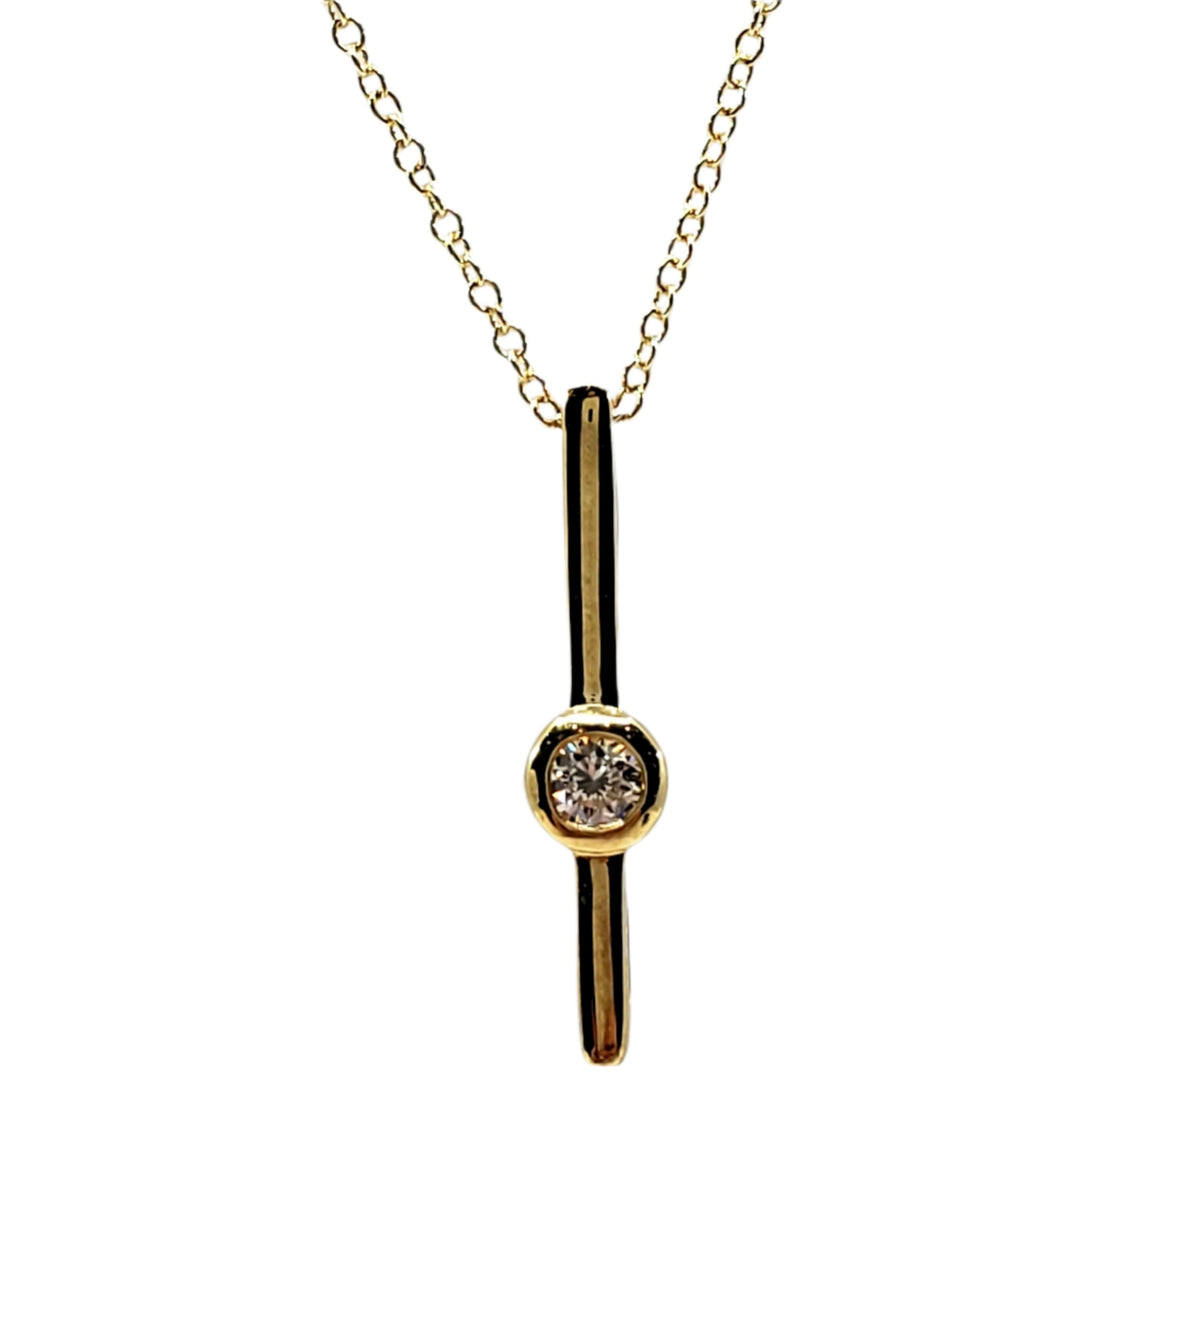 10K Yellow Gold 0.06cttw Diamond Necklace with Cable Chain (Spring Clasp) - Adjustable 17 - 18 Inches